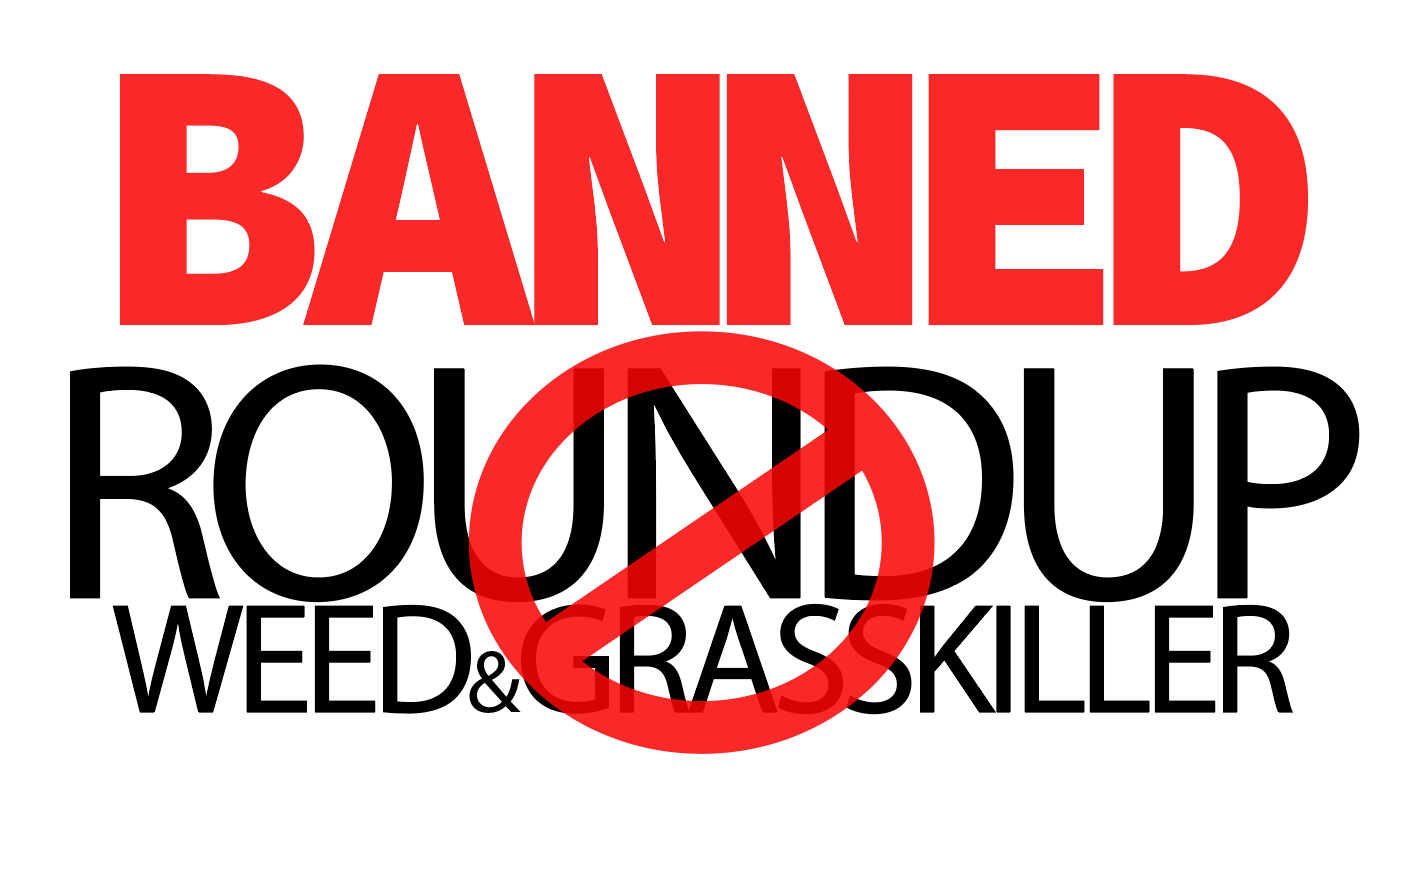 RoundUp Weed & Grass Killer Banned